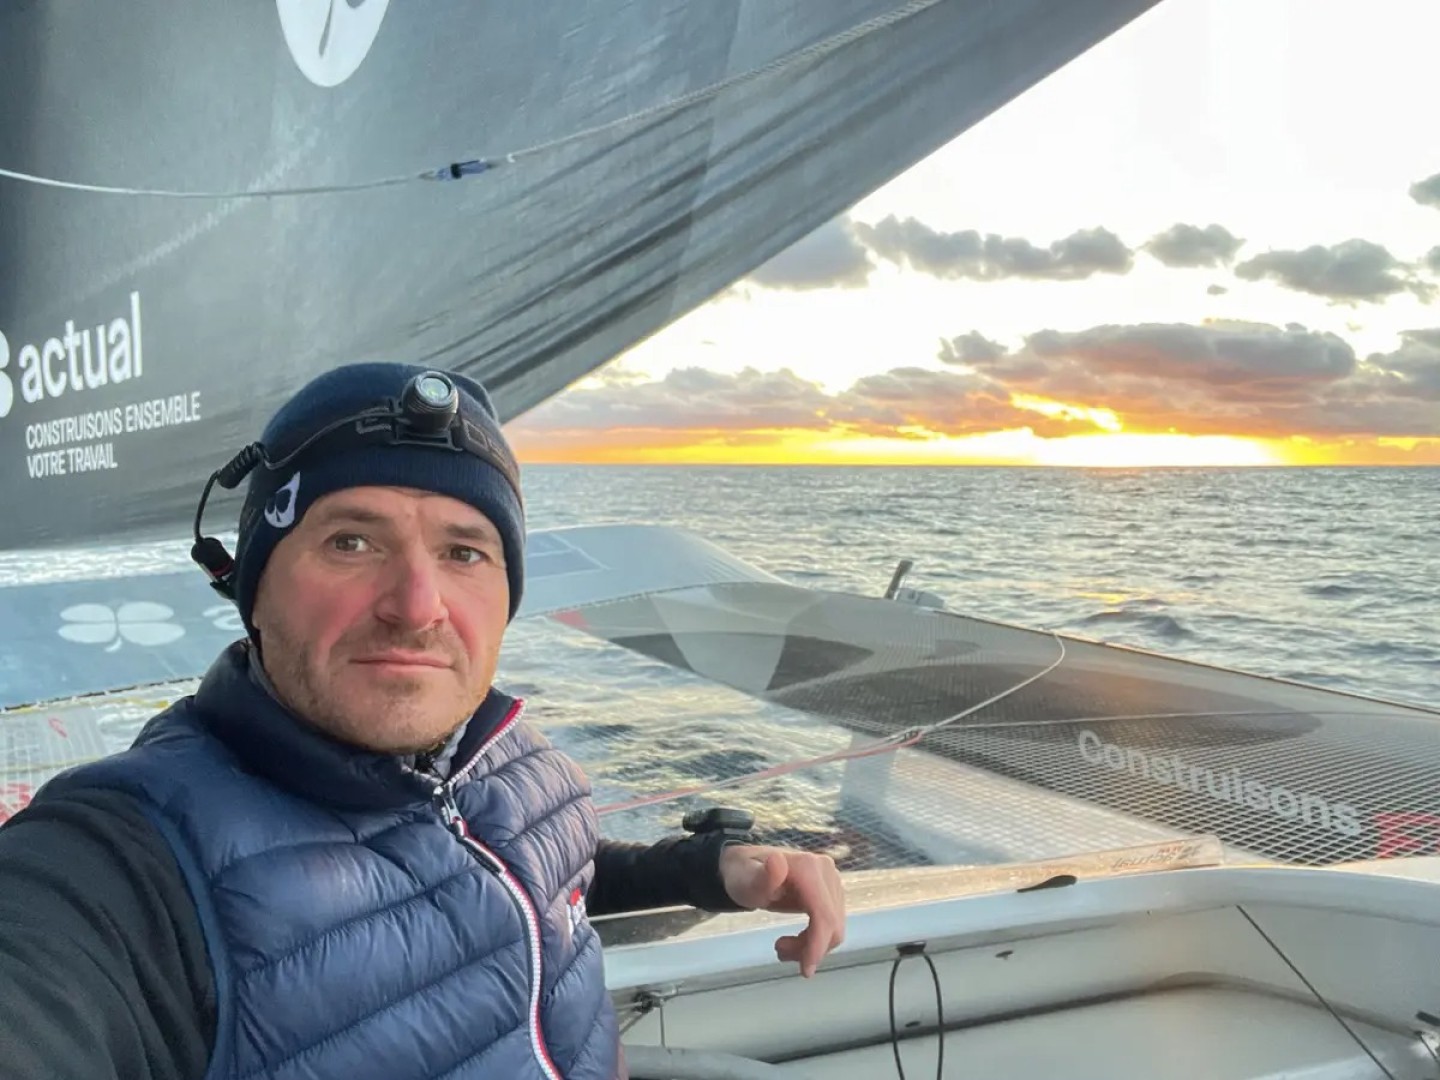 Arkéa Ultim Challenge-Brest, technical stop in Cape Town for Marchand